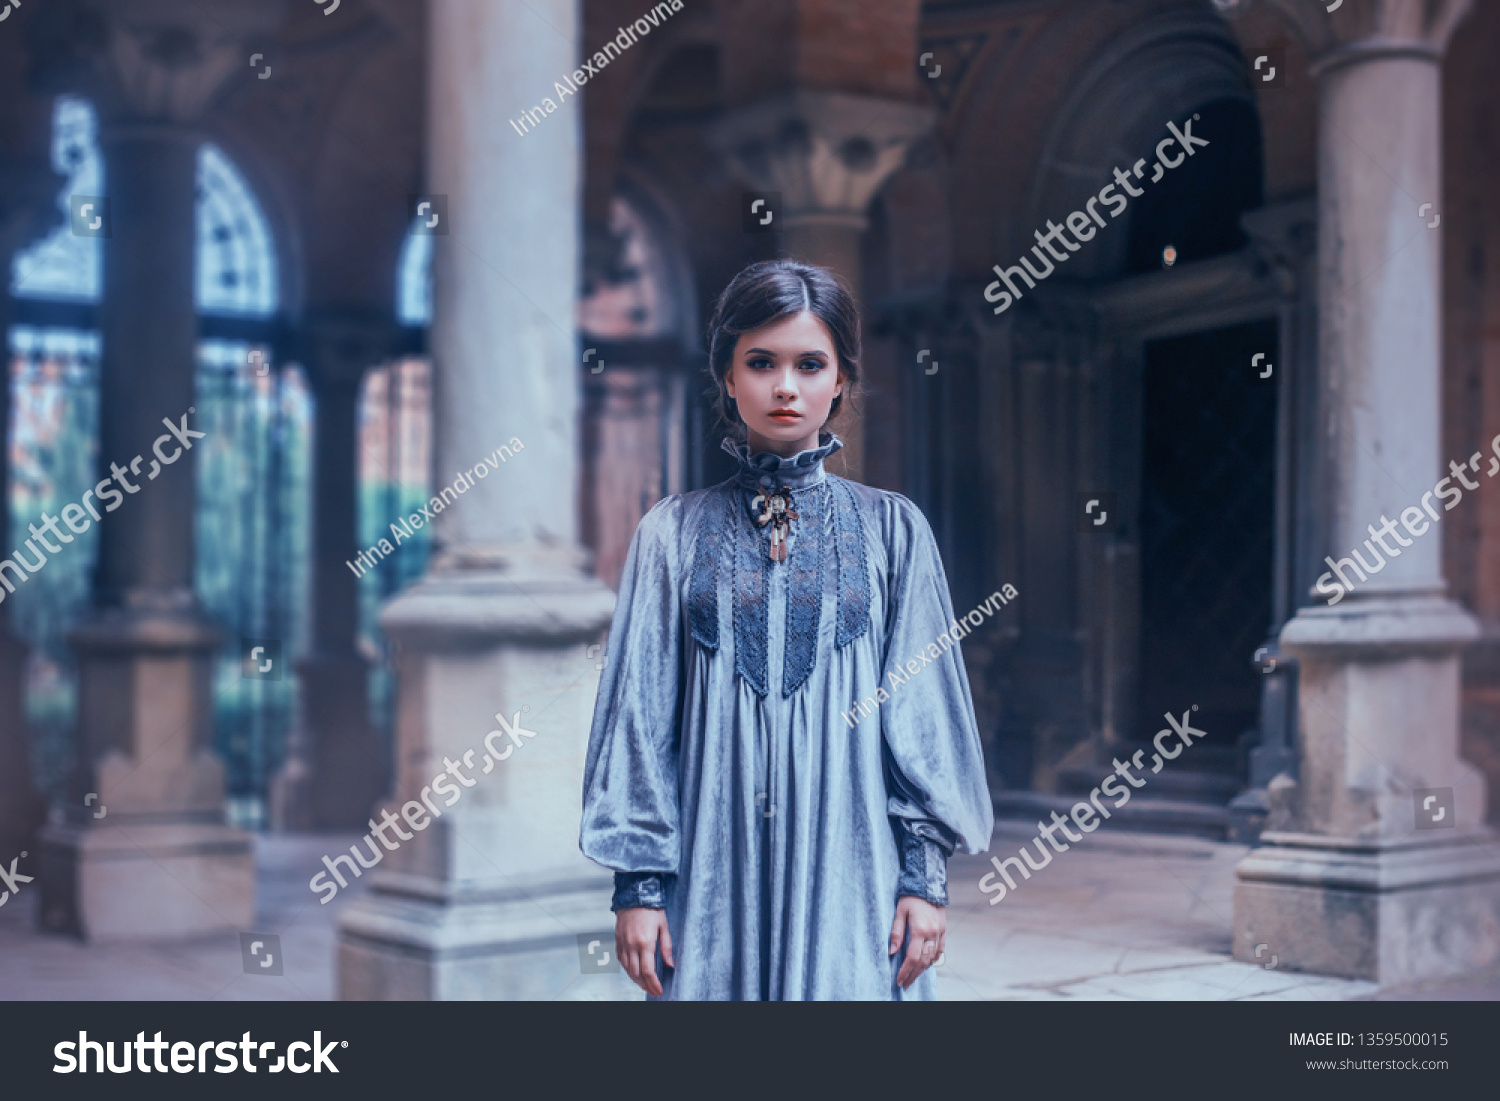 Strict teacher in a gray velvet vintage dress looking into the camera. Overseer psychological wedge strictly mode. Art photography, depressed mood. Background gothic architecture with columns #1359500015